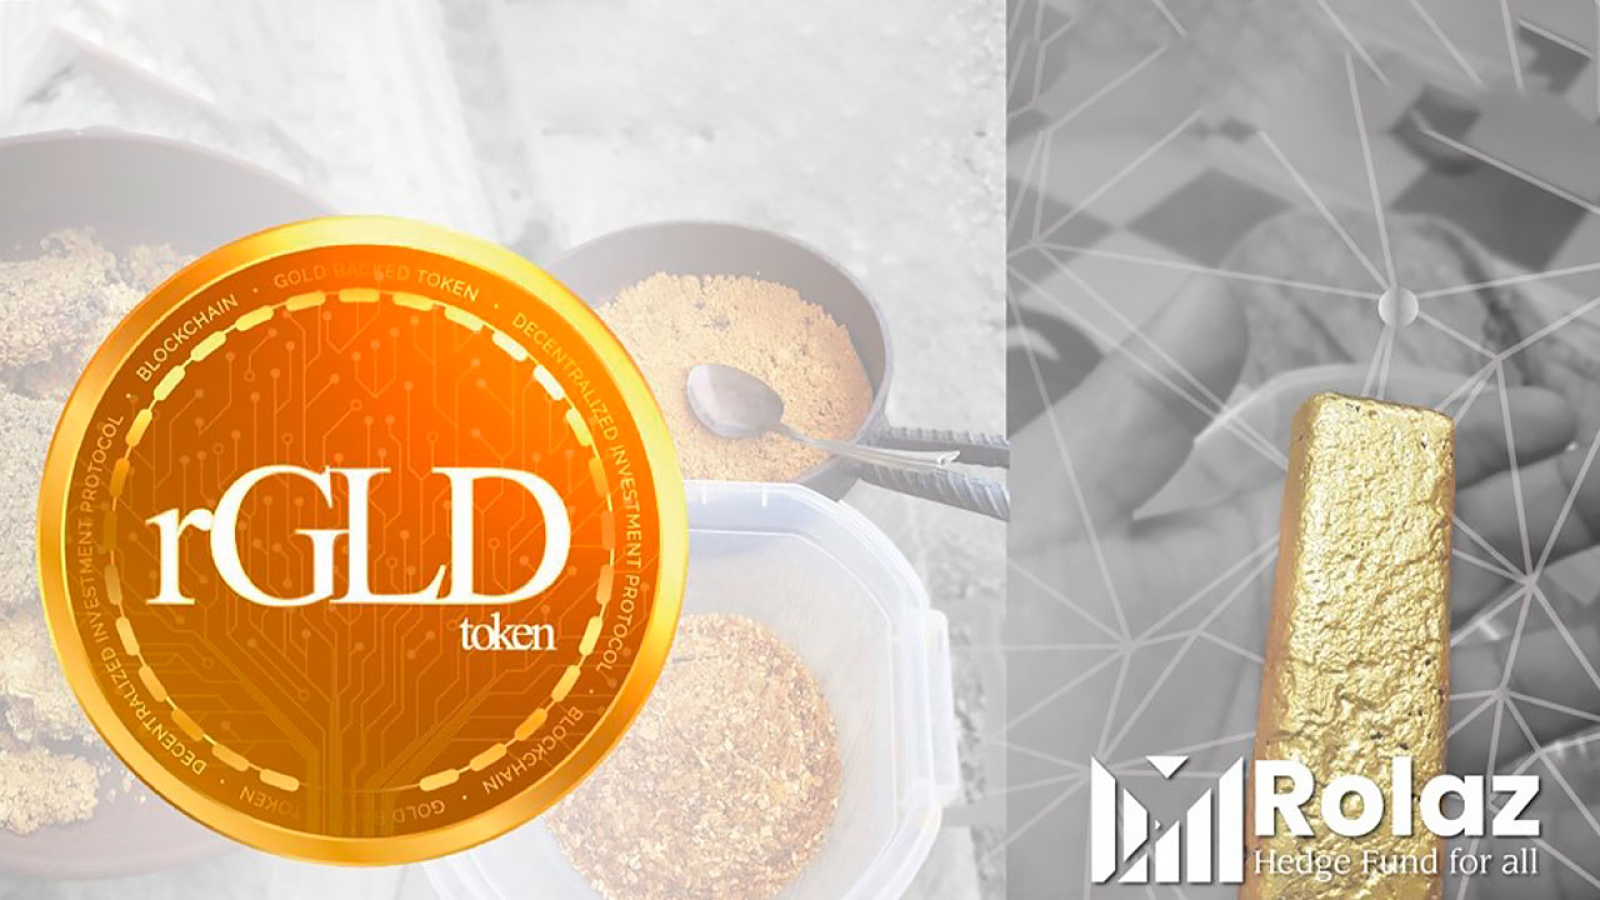 Rolaz Gold Completes Its IEO And Listing, Set To Disrupt a Billion Dollar Industry